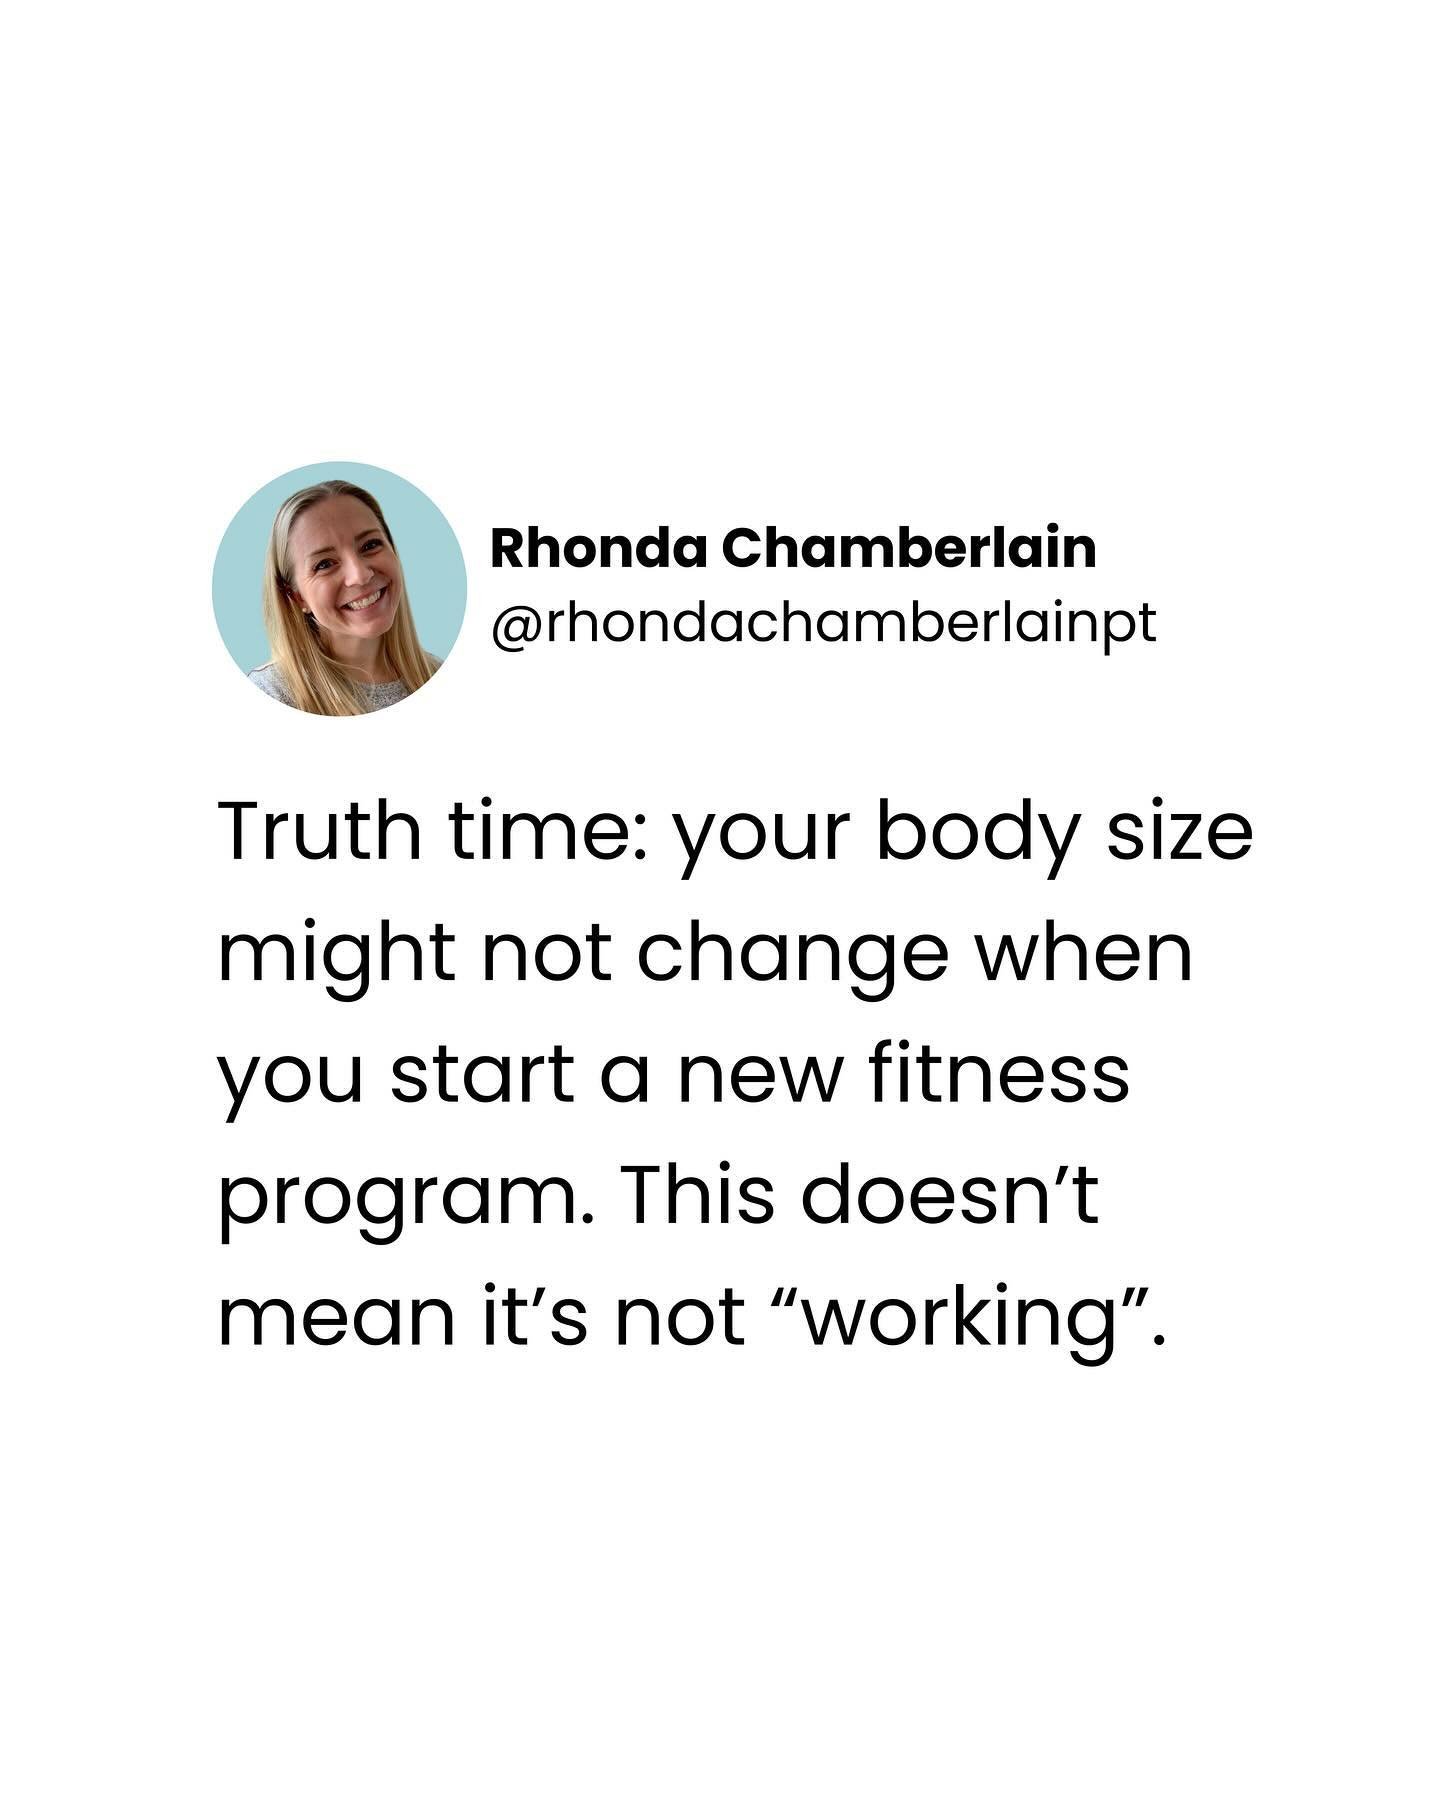 The fitness and diet industry have led us to believe that the only reason we should exercise is to shrink or change our bodies. I&rsquo;m here to call BS on all of that.

It&rsquo;s not wrong to have weight loss as a goal. But when it&rsquo;s our sol